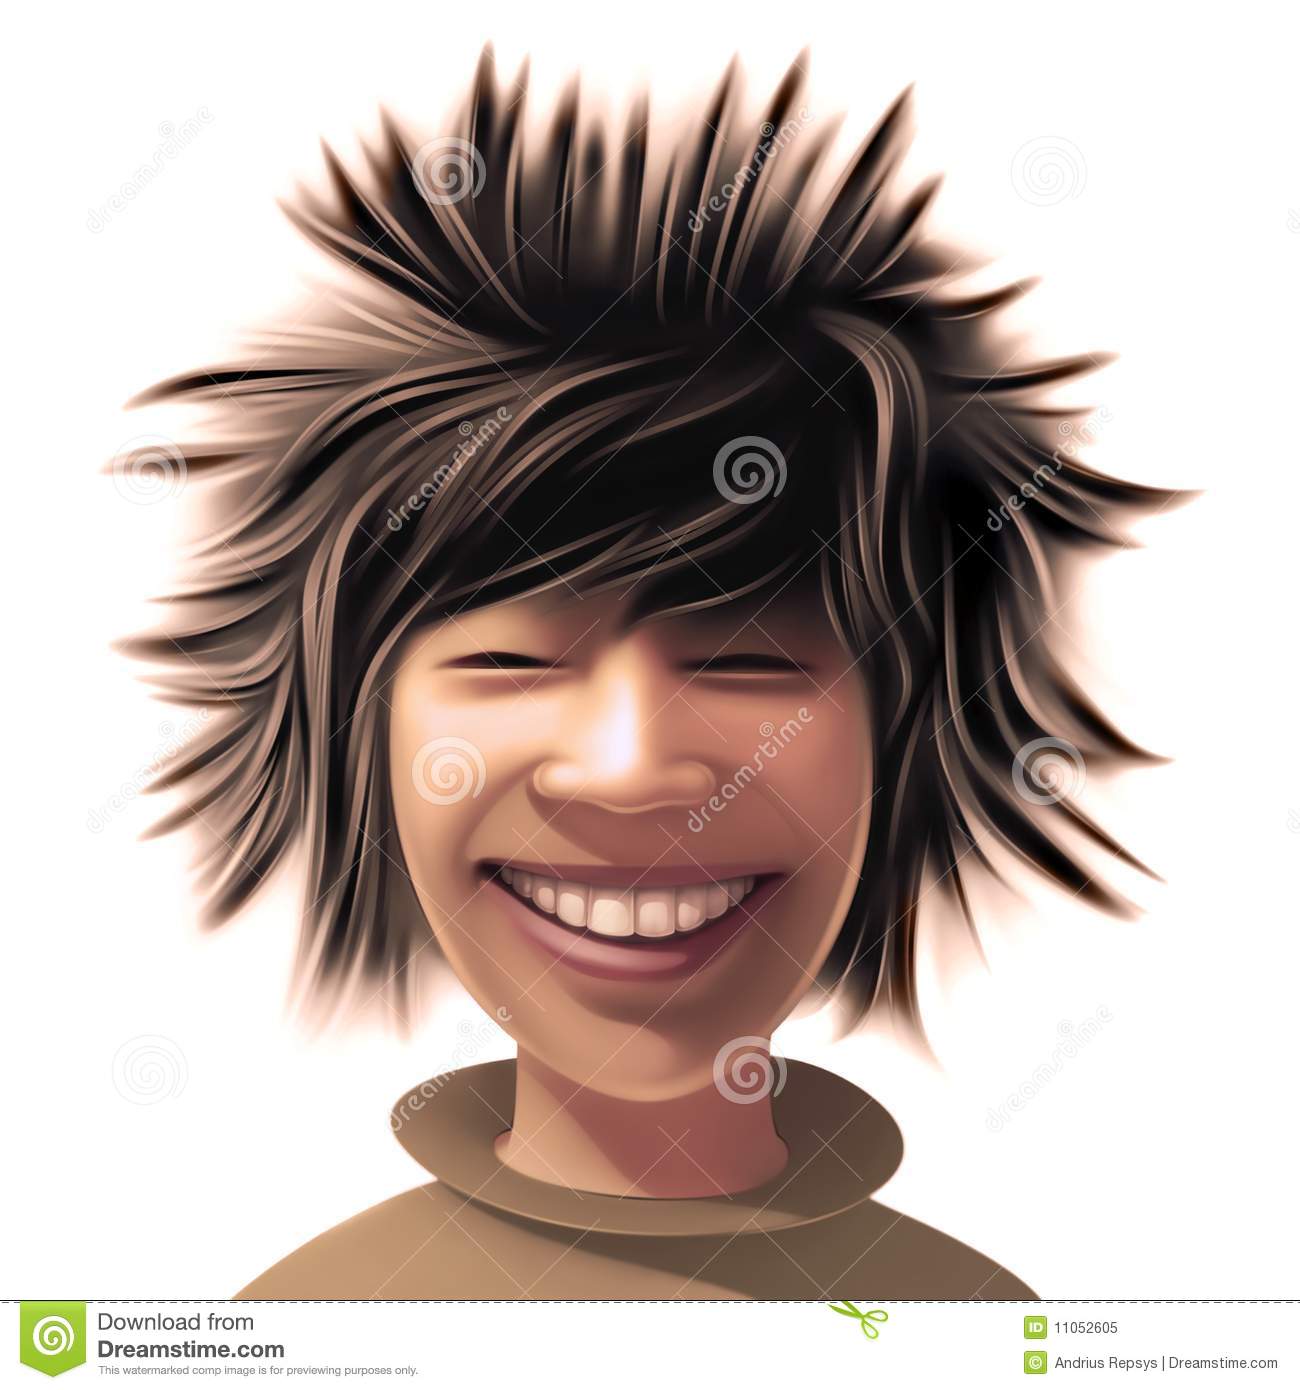 Boy With A Wild Hair Style Royalty Free Stock Photo   Image  11052605